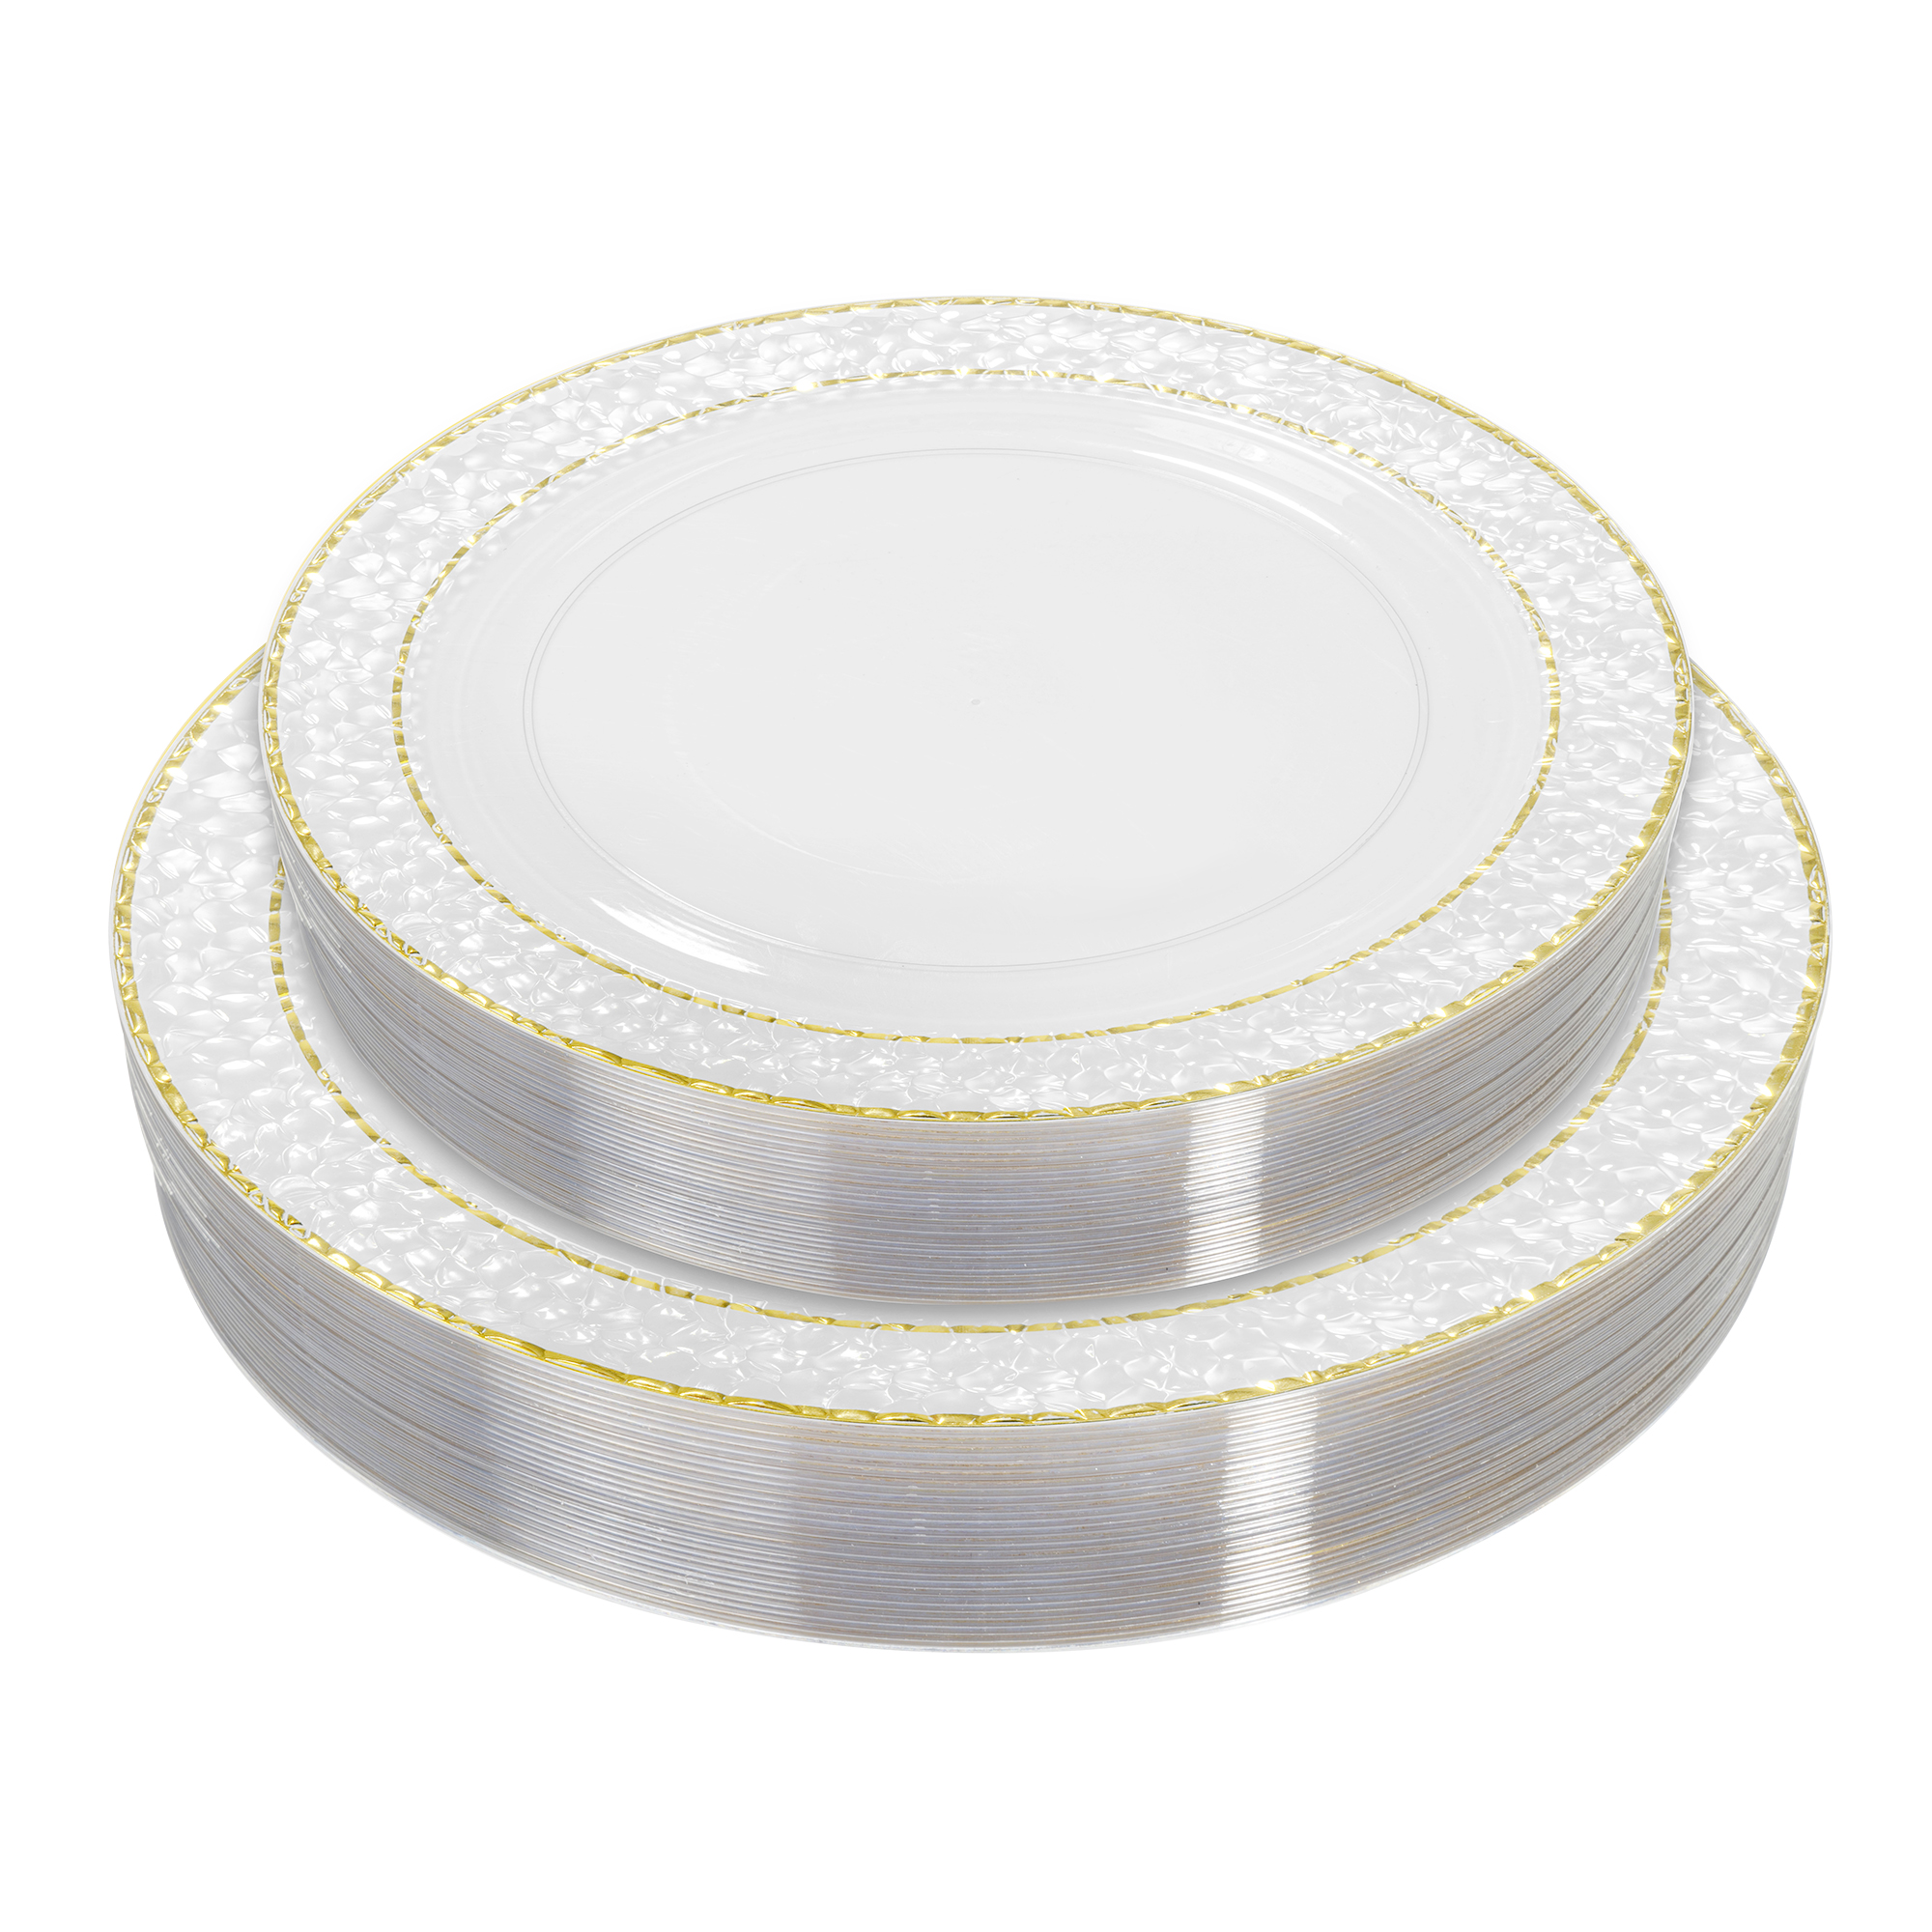 Plastic Plate Set With Hammered Double Gold Rim Edge 50pc/set - Gold